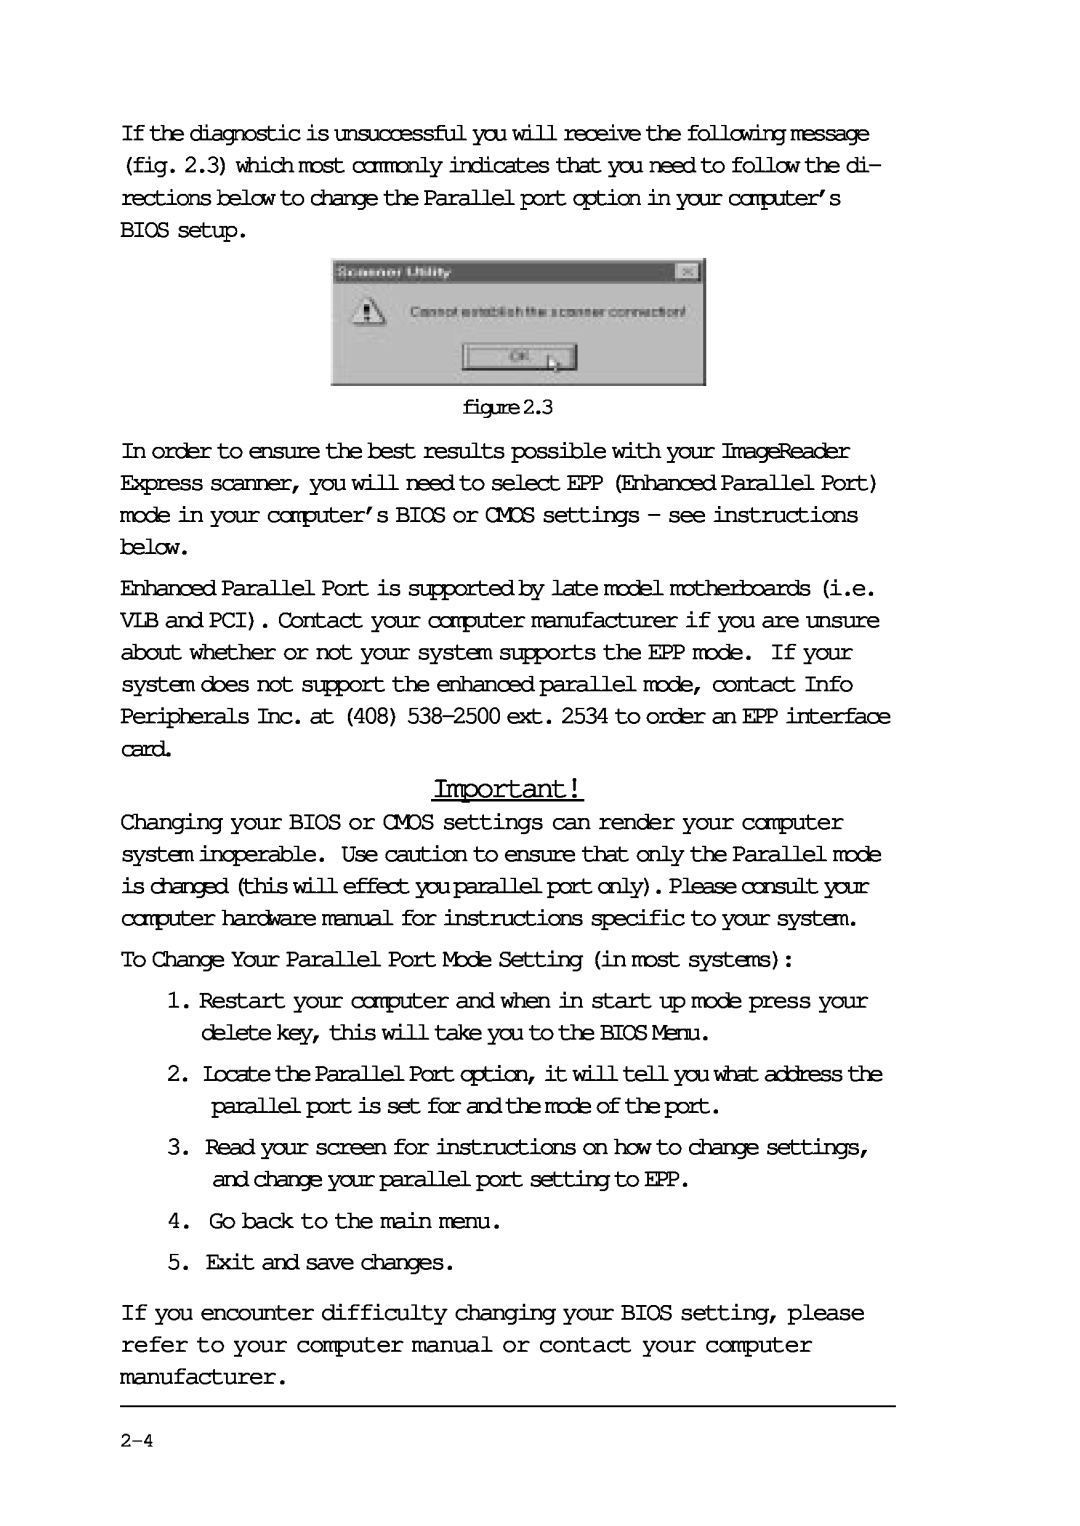 Compaq P/N DOC-FB4B manual To Change Your Parallel Port Mode Setting in most systems 